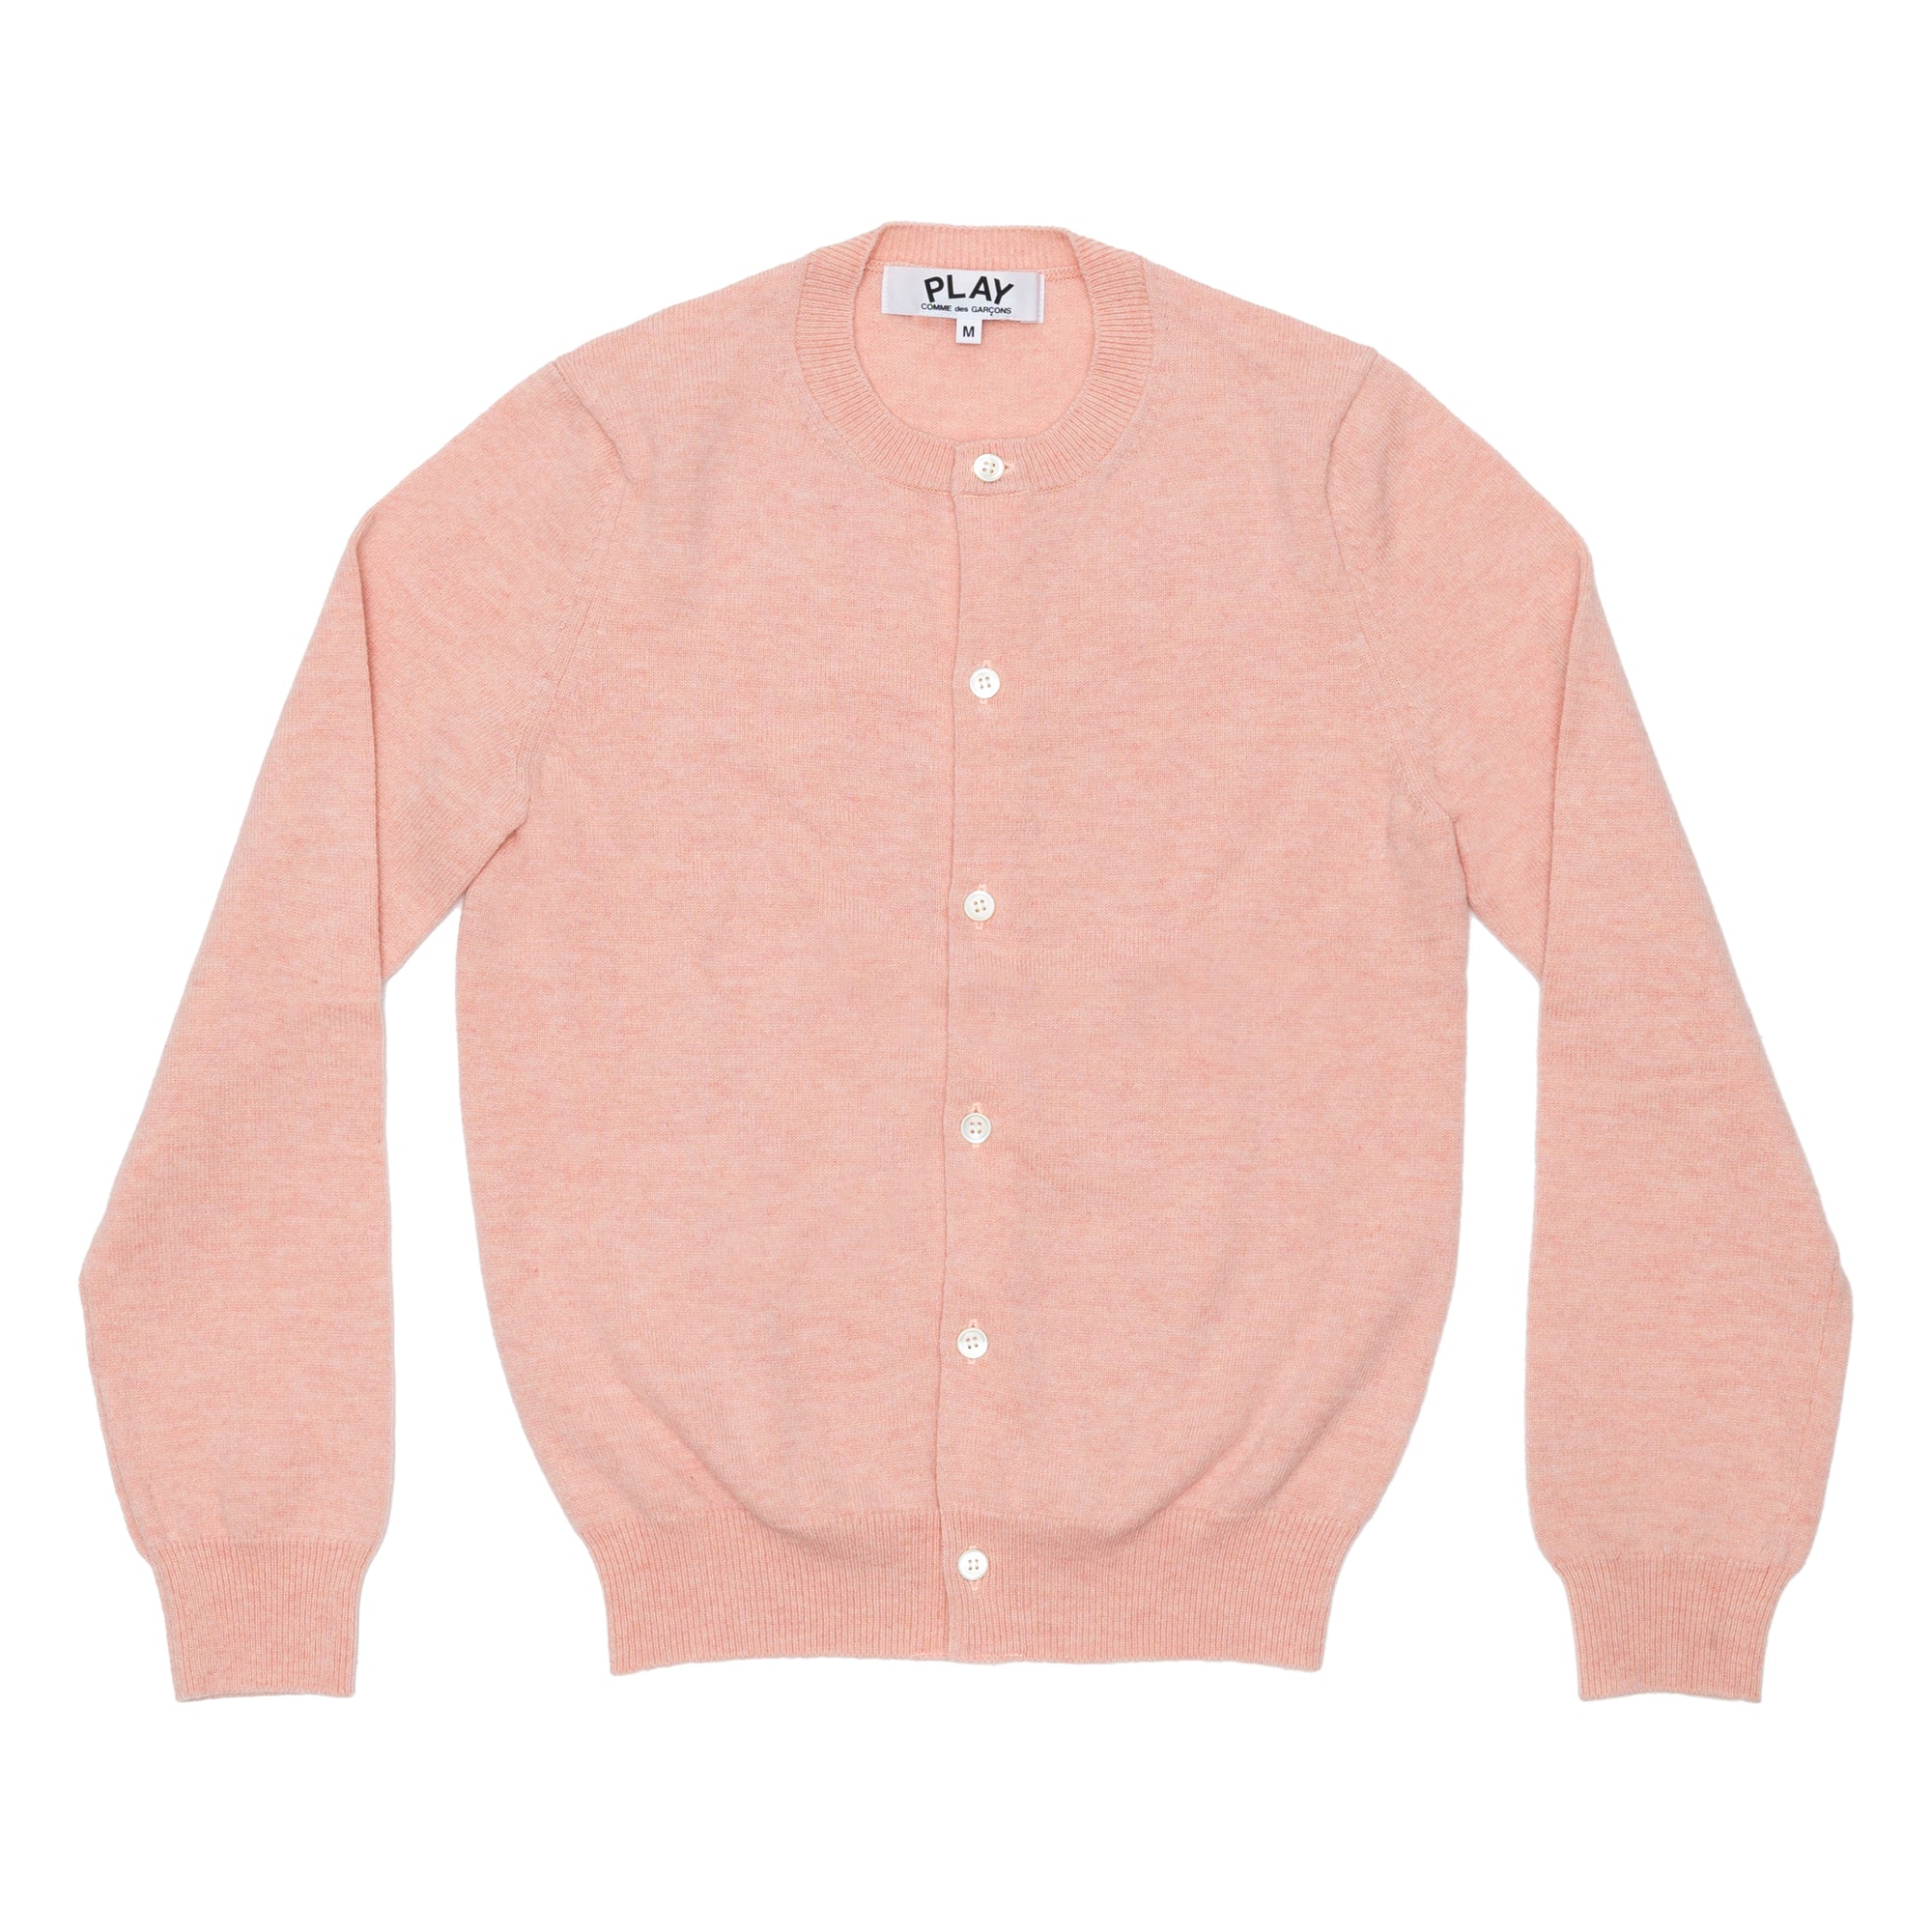 PLAY CDG  - Top Dyed Carded Lambswool Women's Cardigan - (Pink) view 1